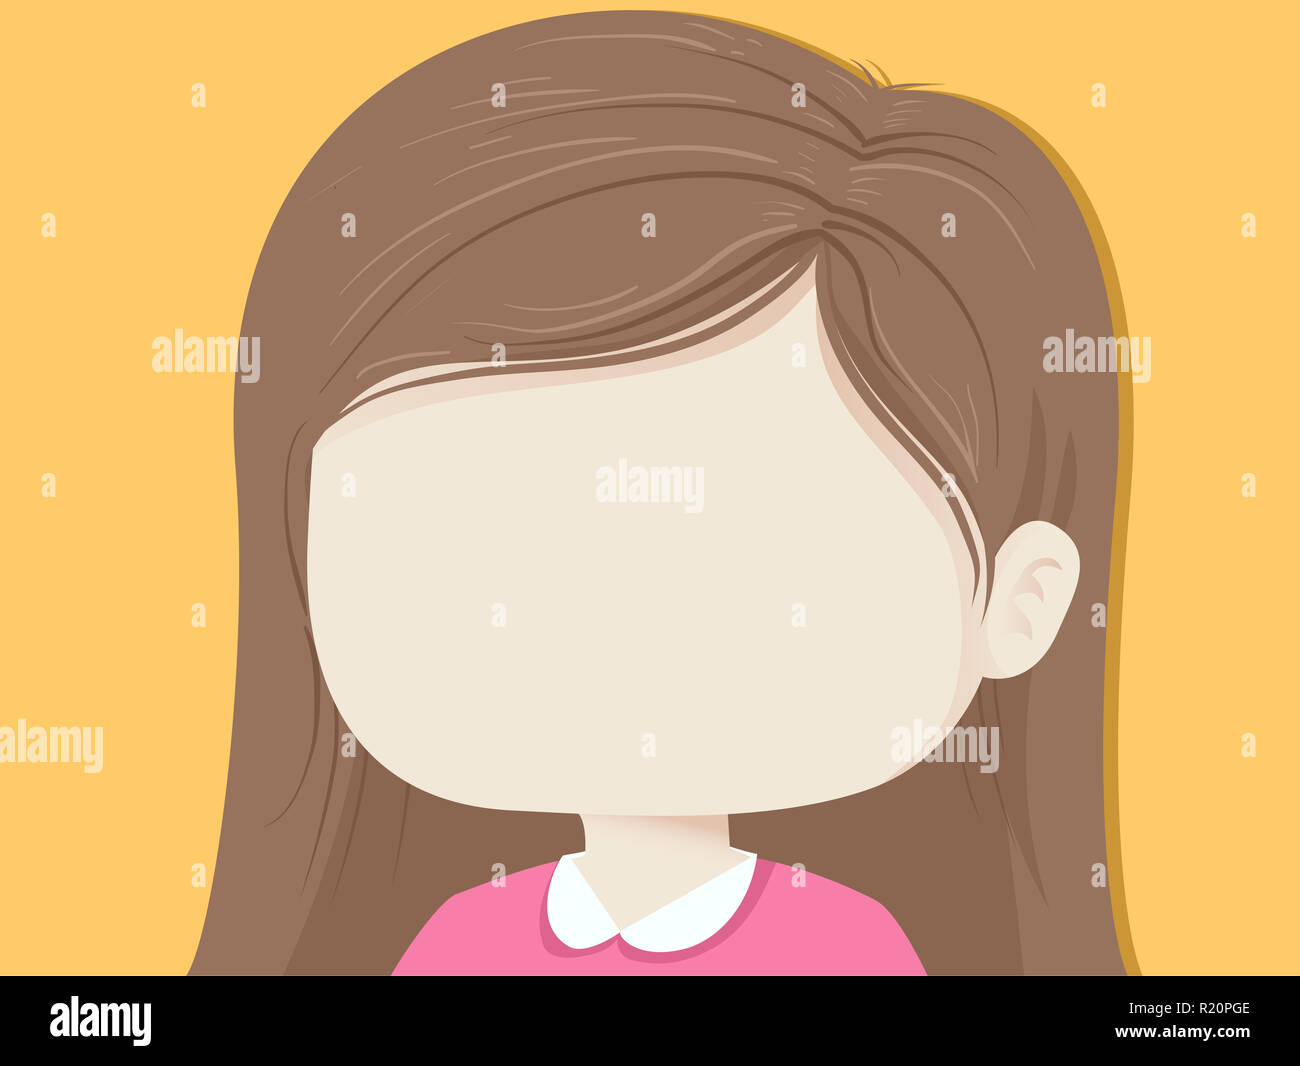 Colorful Background Illustration Featuring a Little Girl With a Blank Face  Stock Photo - Alamy